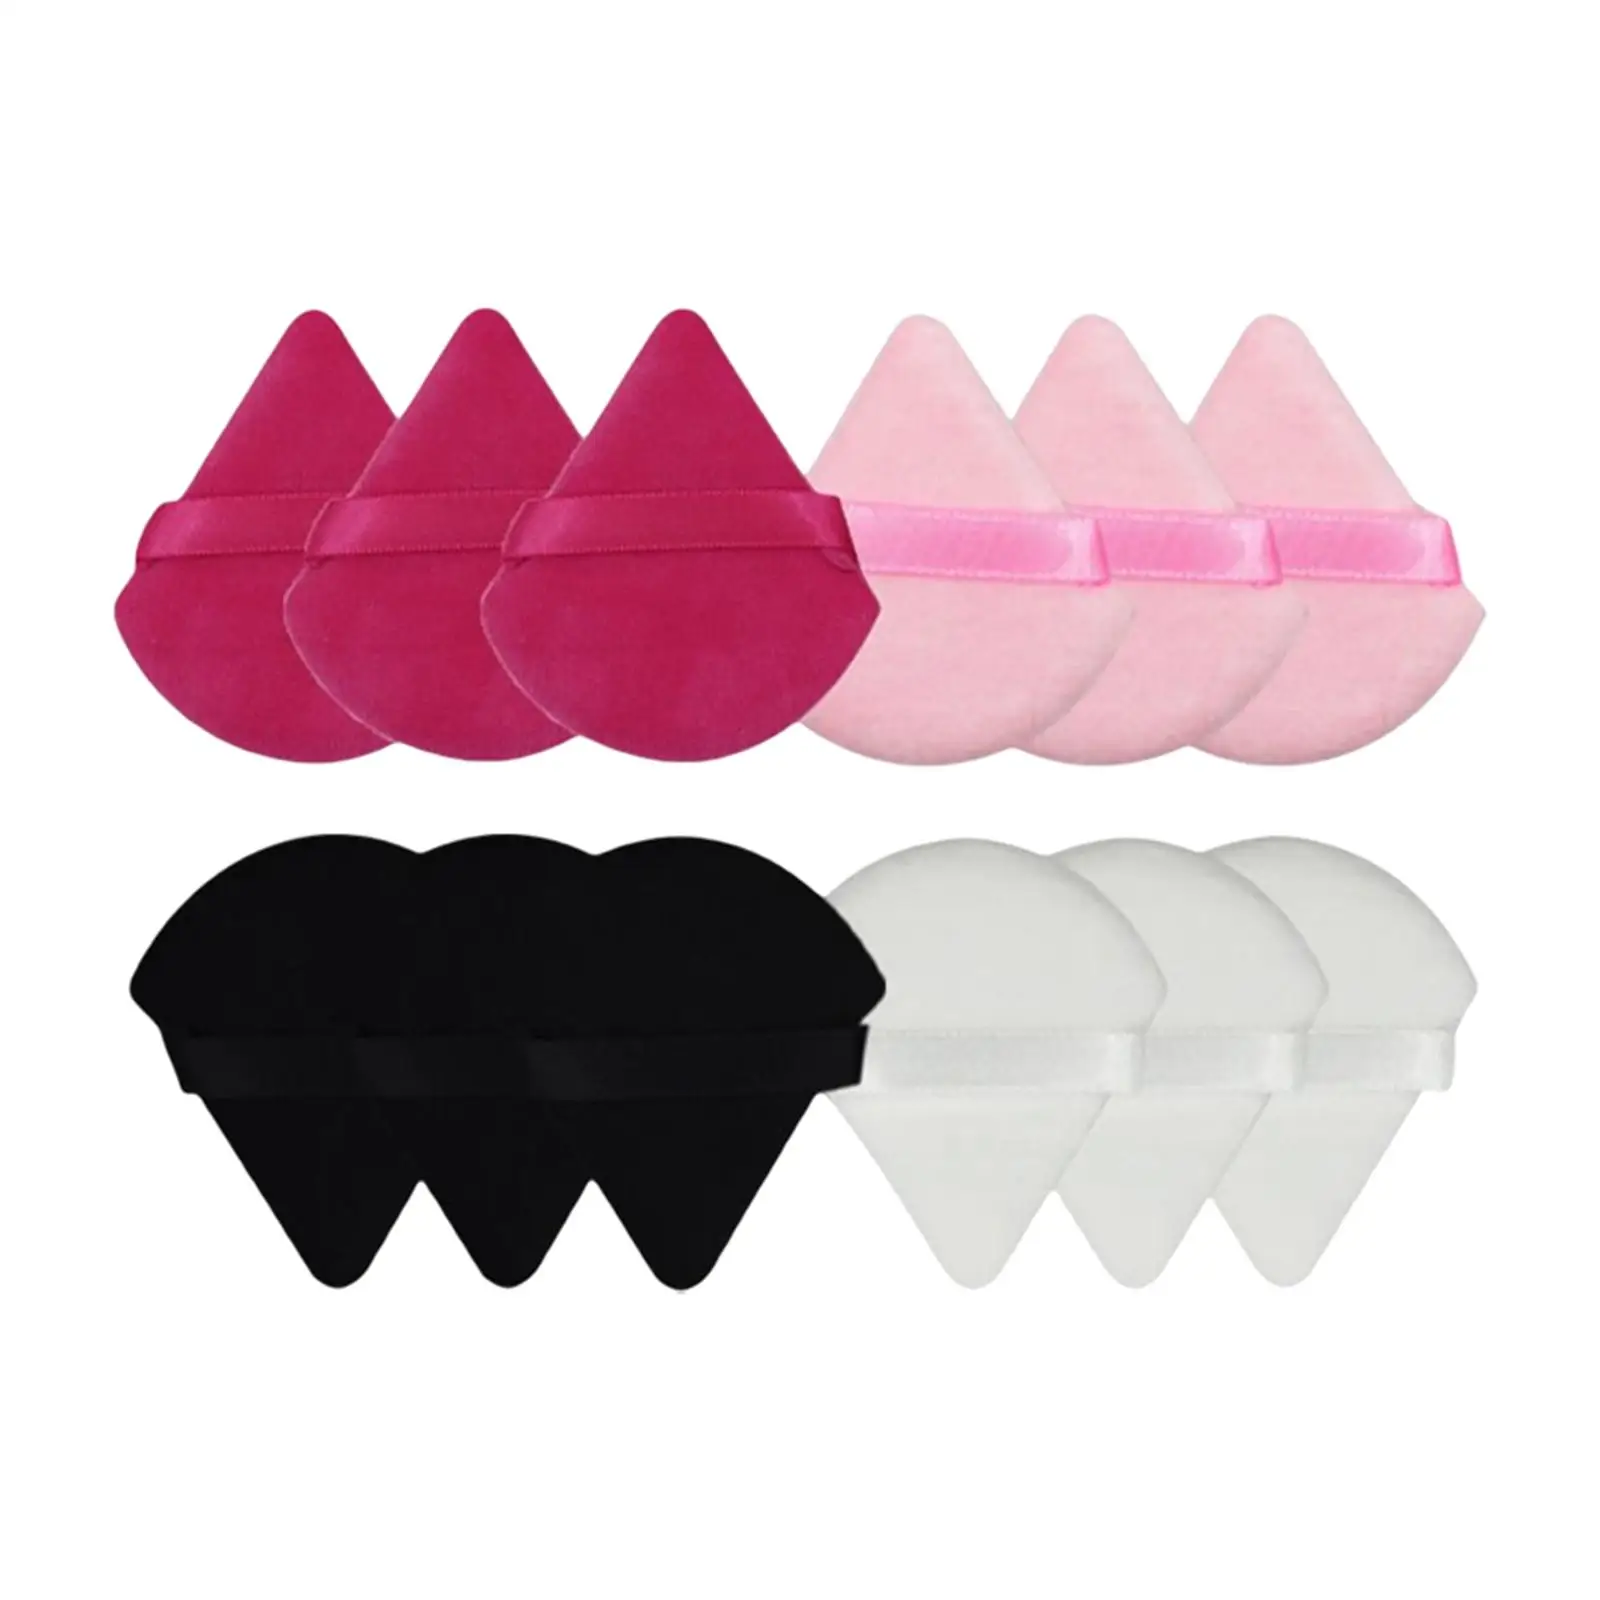 12x Triangle Powder with Strap Soft Cosmetic Sponge for Loose Powder Mineral Powder Dry Powder Products Blush Contouring